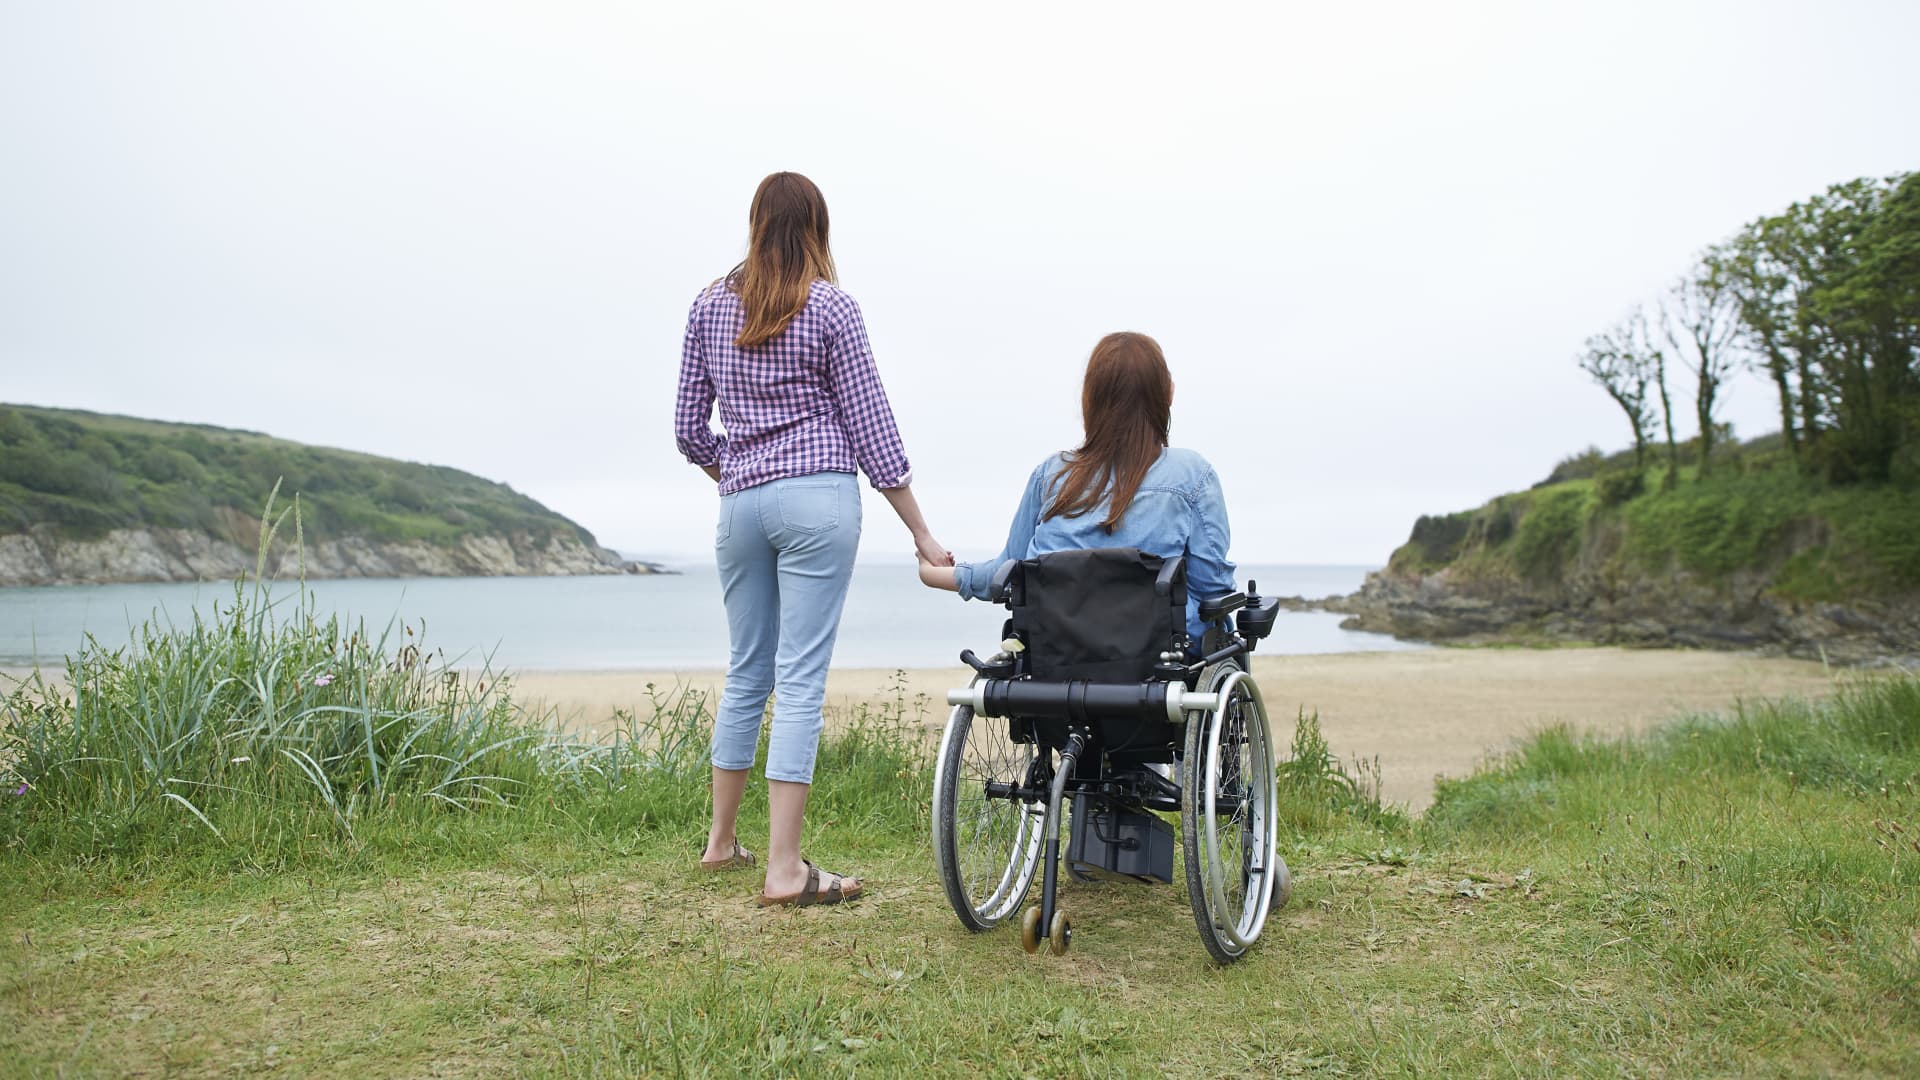 How to financially plan for a disabled loved one’s future care